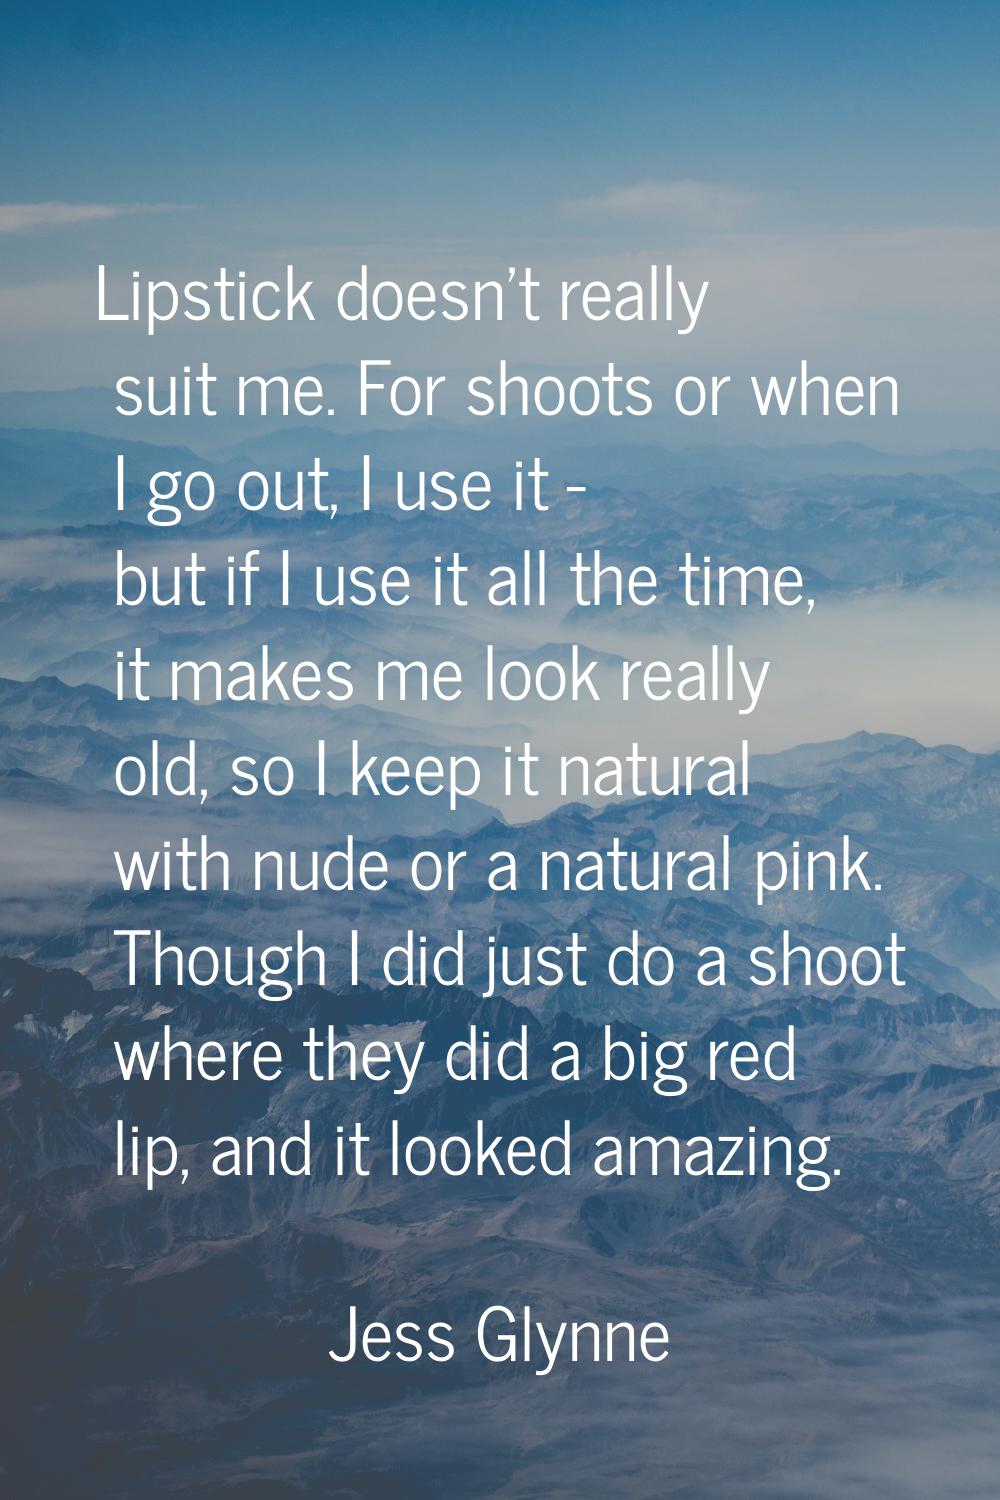 Lipstick doesn't really suit me. For shoots or when I go out, I use it - but if I use it all the ti